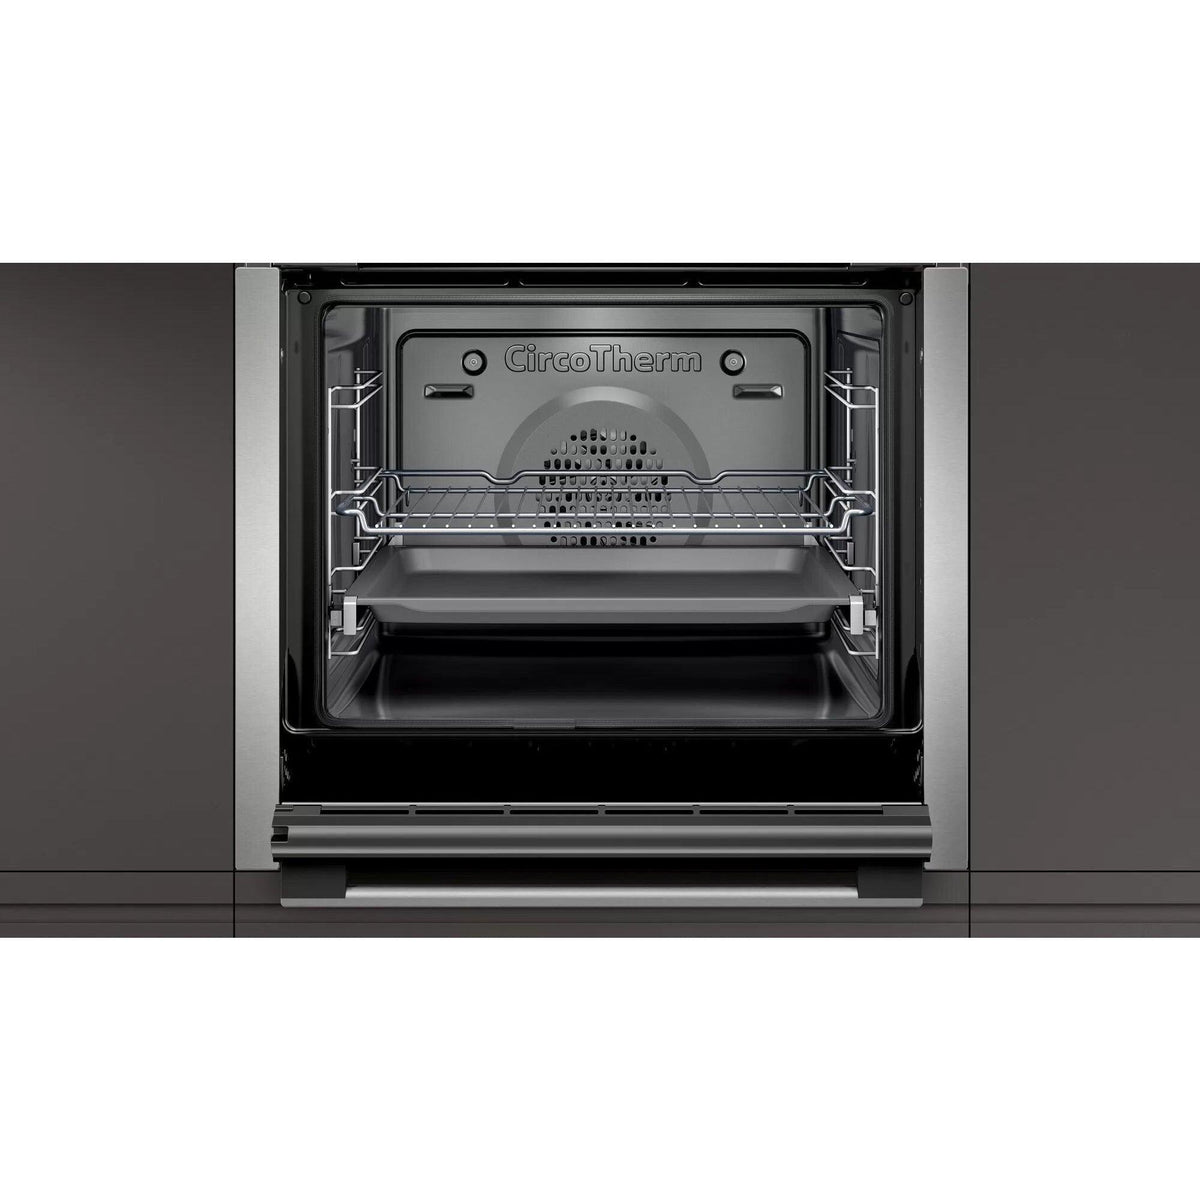 Neff N 50 71L Built-In Electric Single Oven - Stainless Steel | B6ACH7HH0B from DID Electrical - guaranteed Irish, guaranteed quality service. (6977496154300)